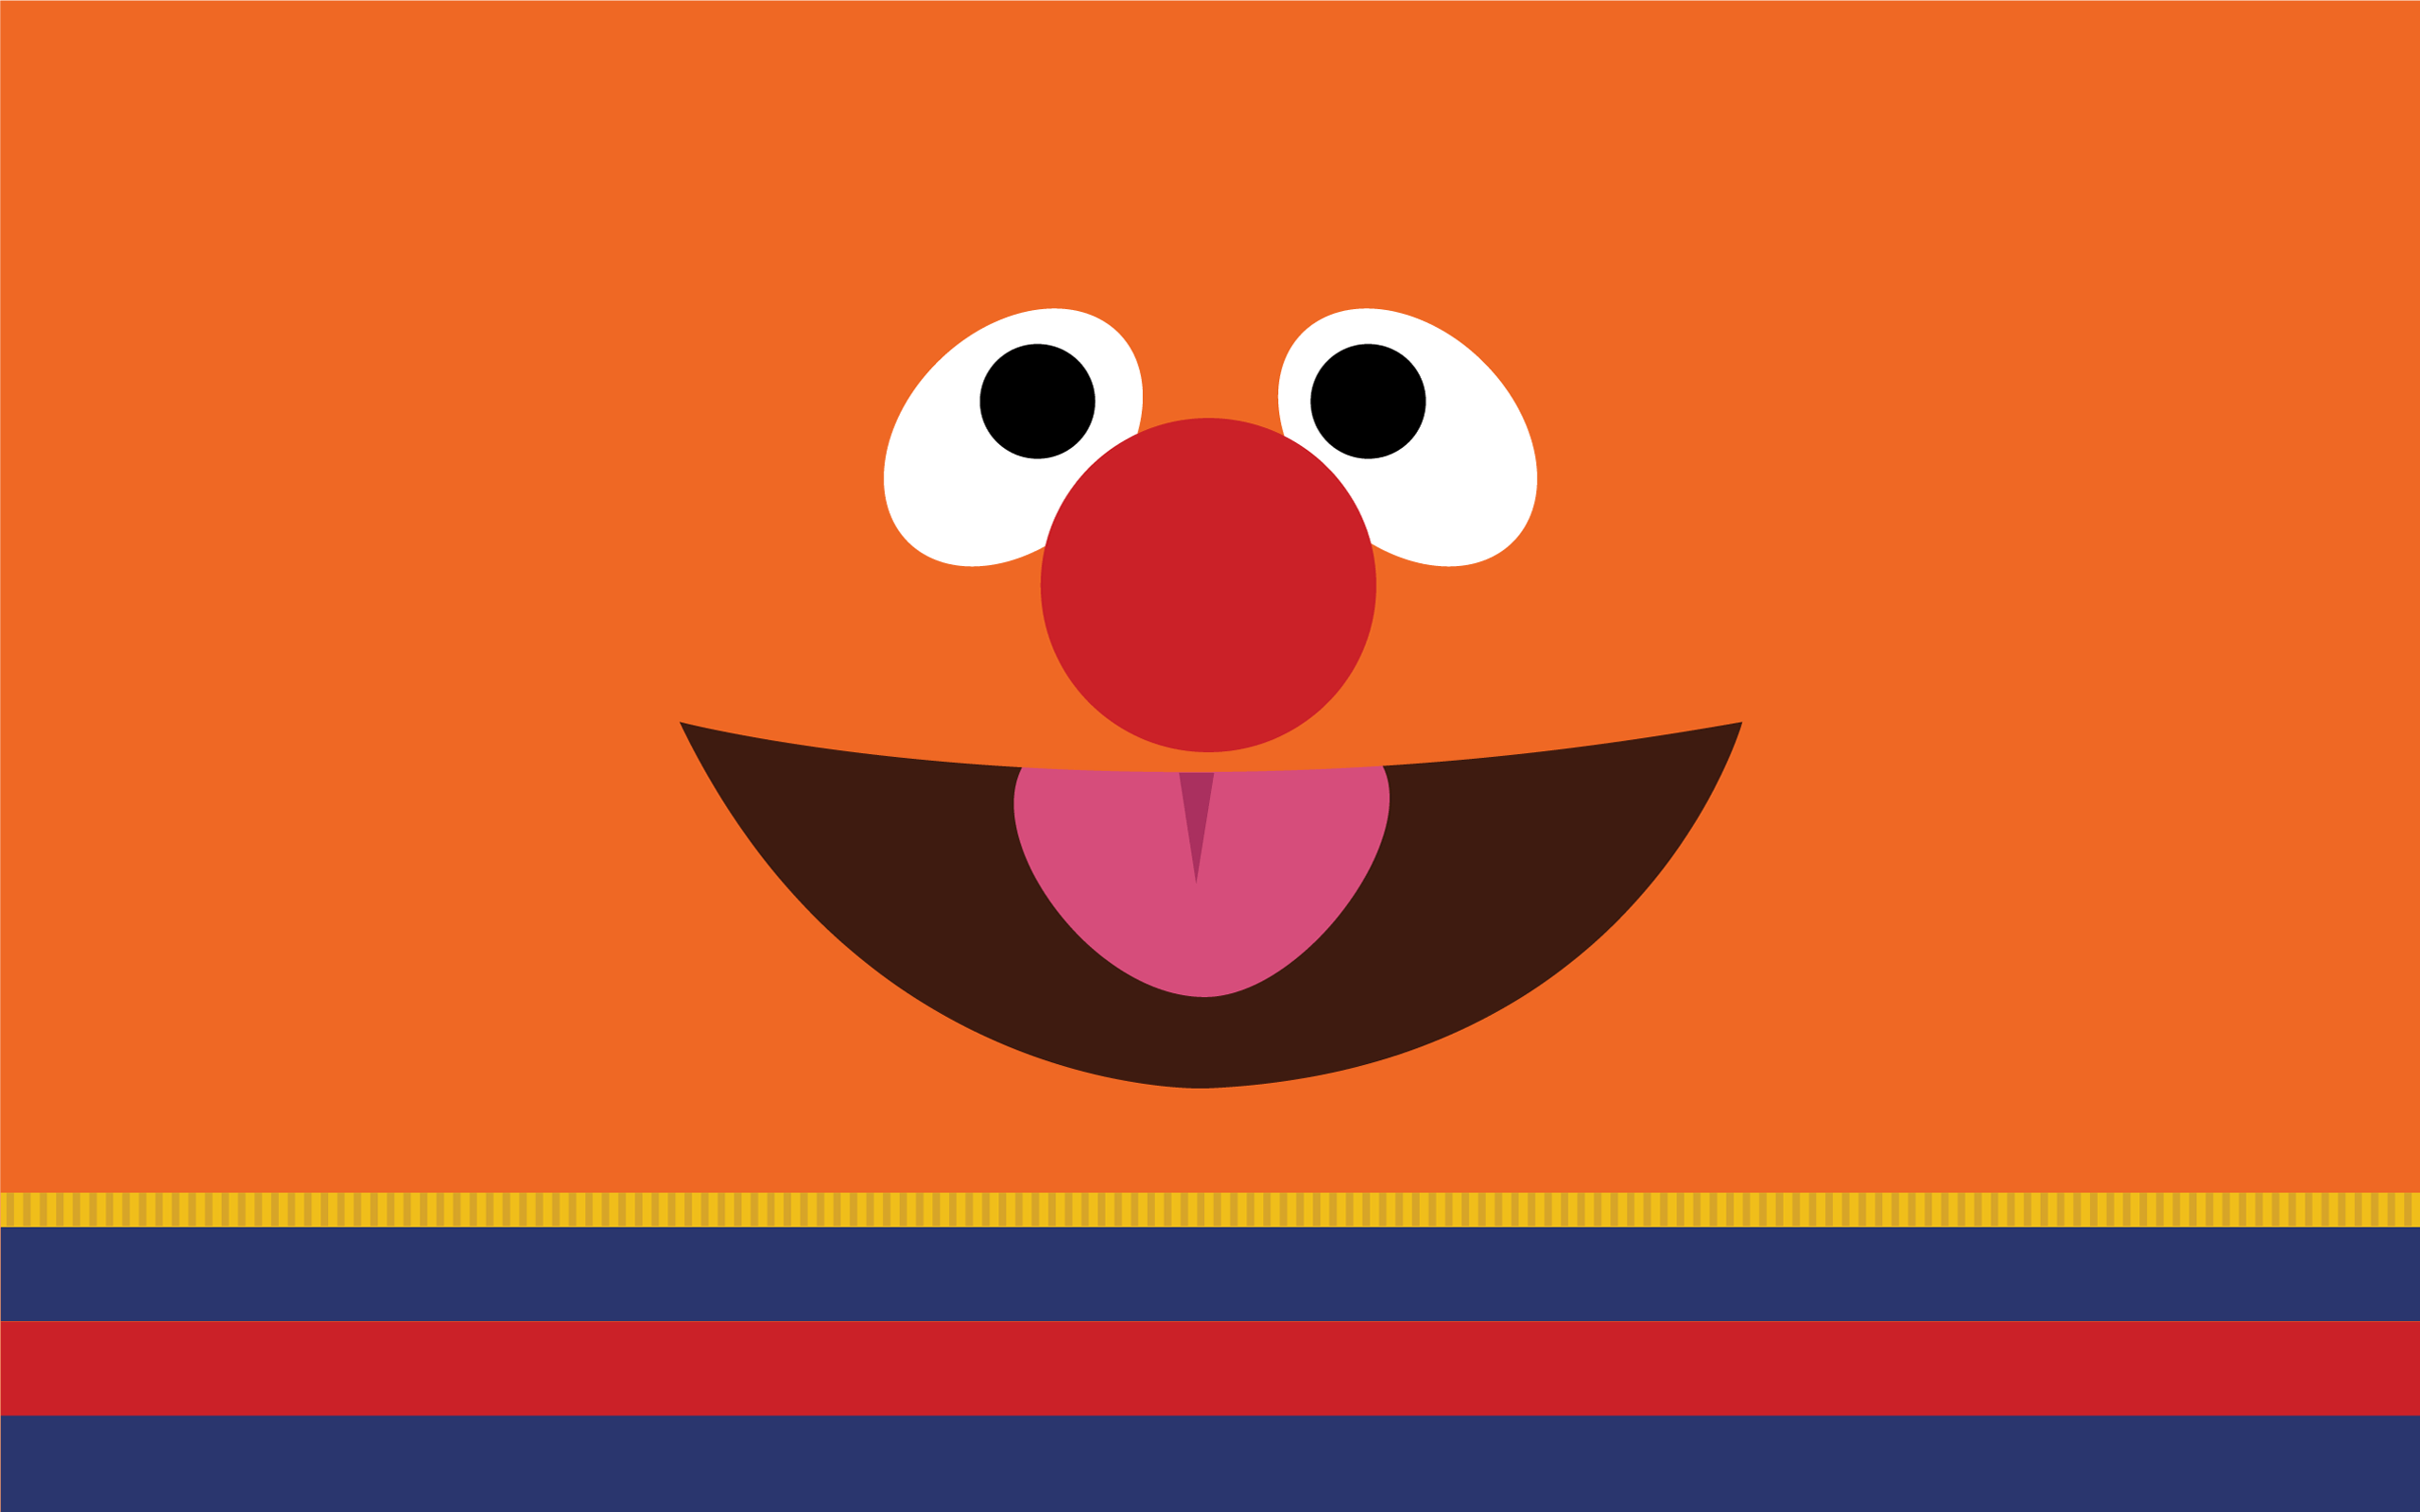 There Was Bert and Now There is Ernie [2560x1600] : wallpapers